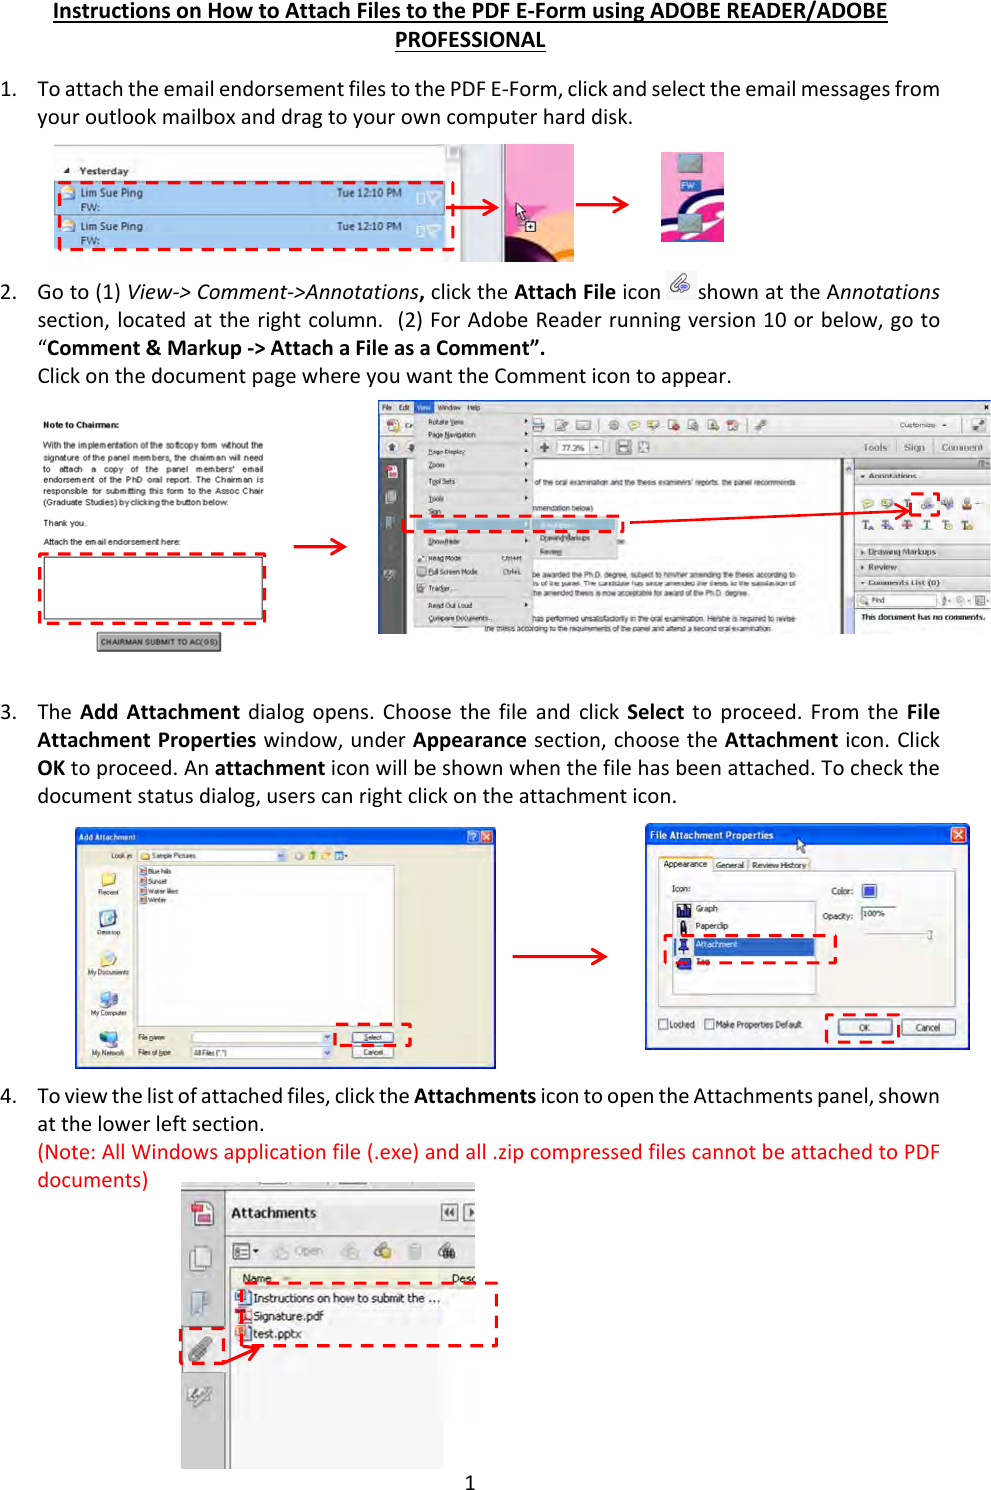 instructions-on-how-to-attachfiles-and-submit-pdf-eforms-instructions